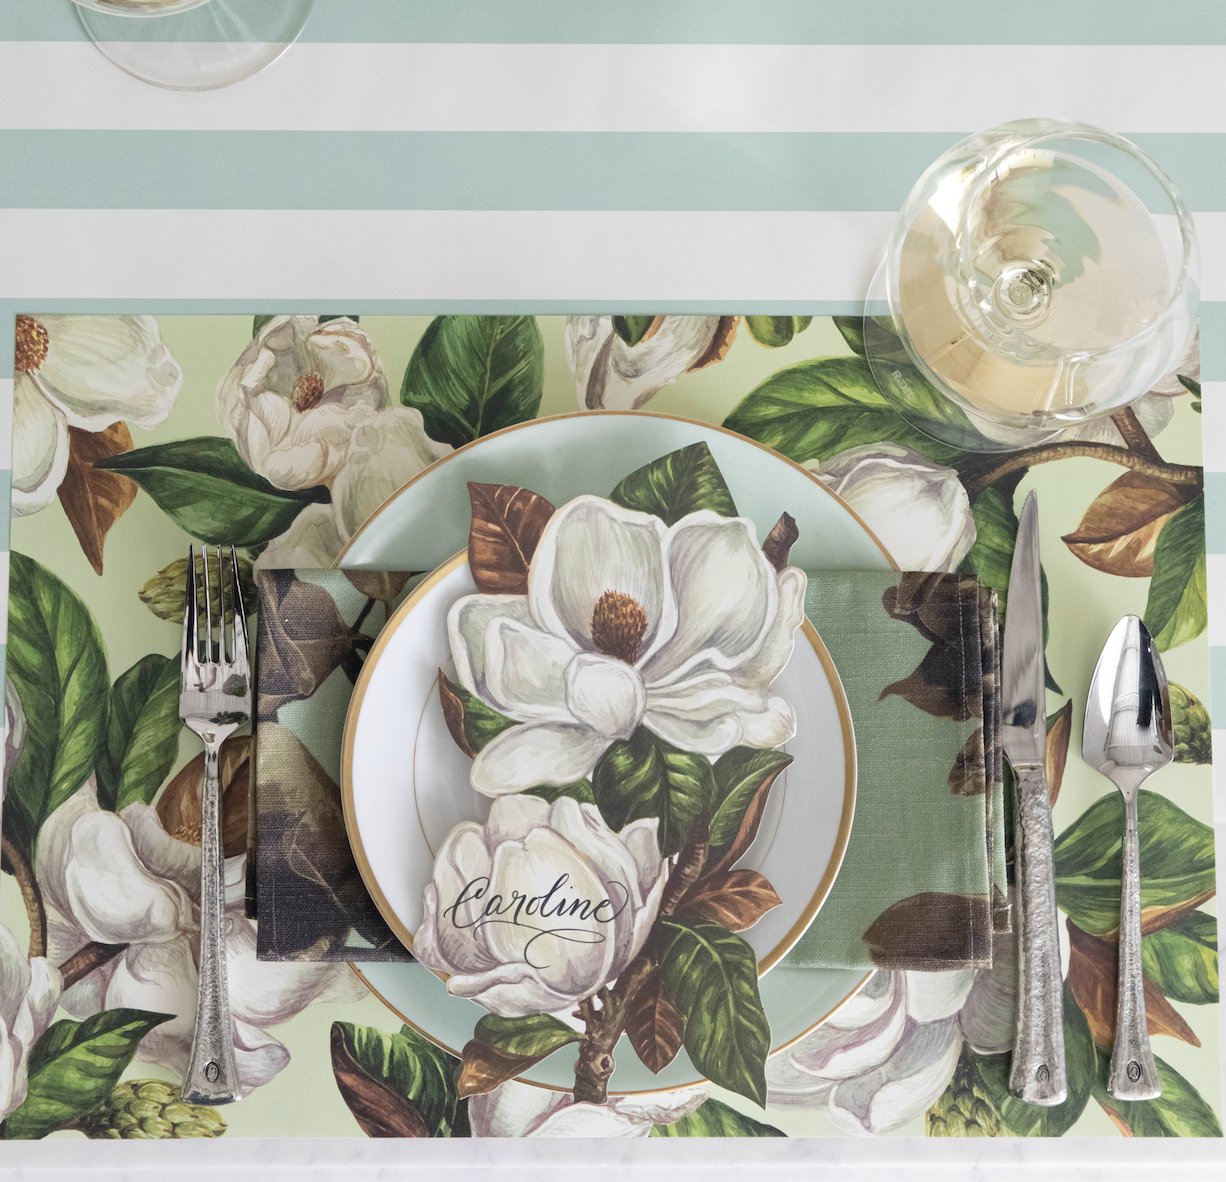 Elegant table setting with floral-patterned plates and matching tablecloth.